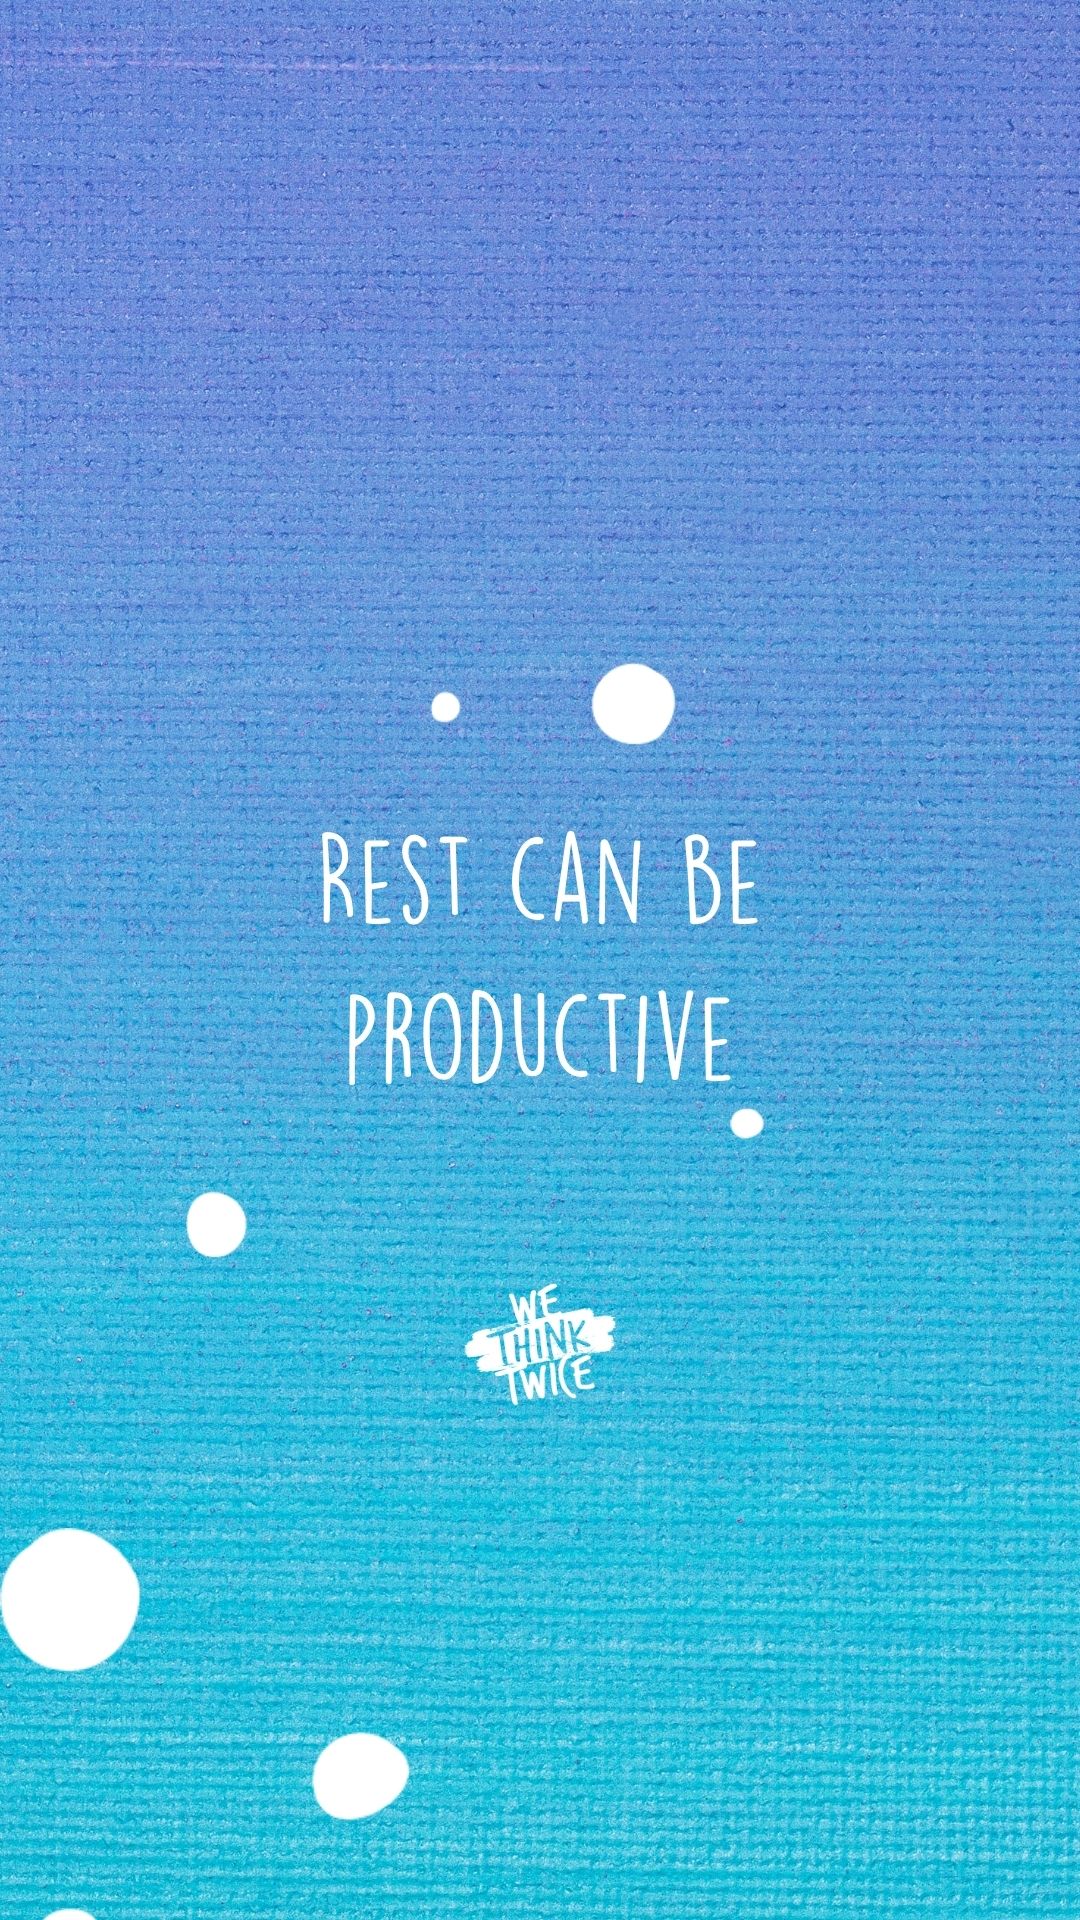 Rest can be productive